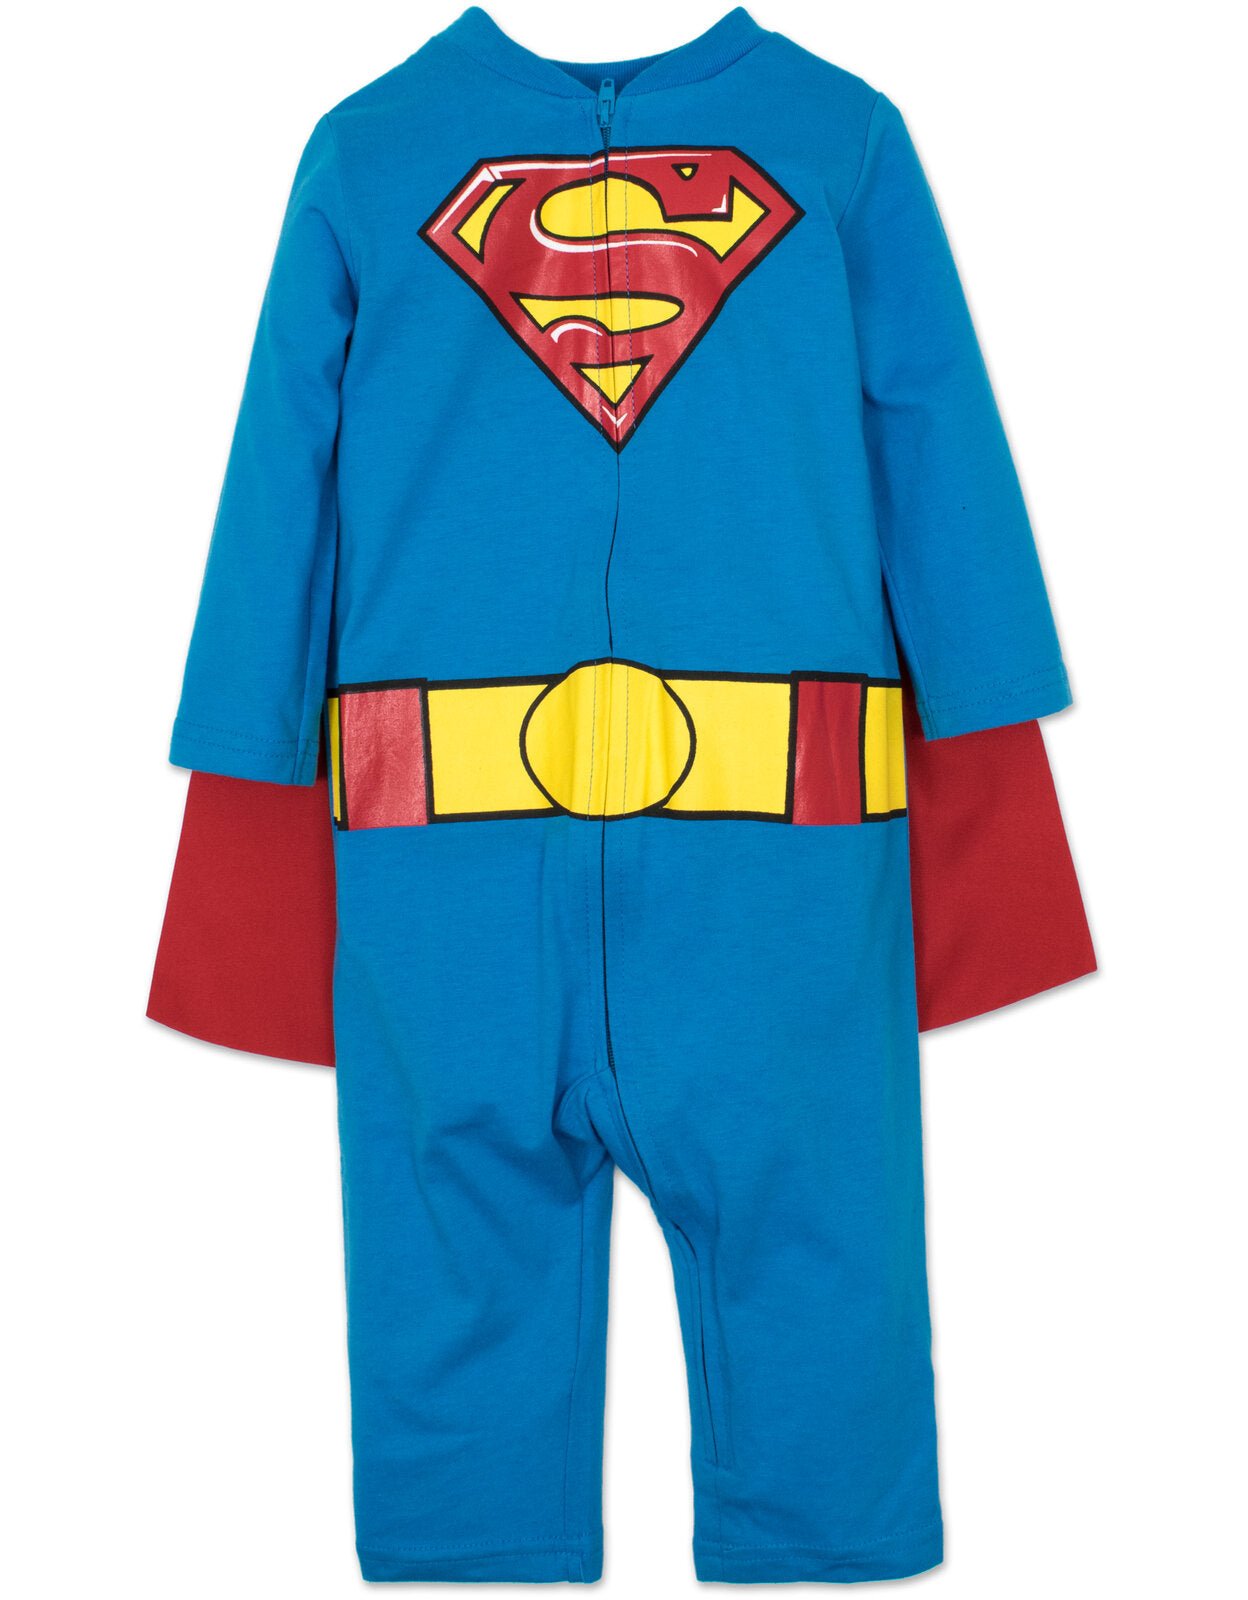 DC Comics Justice League Superman Zip Up Cosplay Costume Coverall and Cape - imagikids